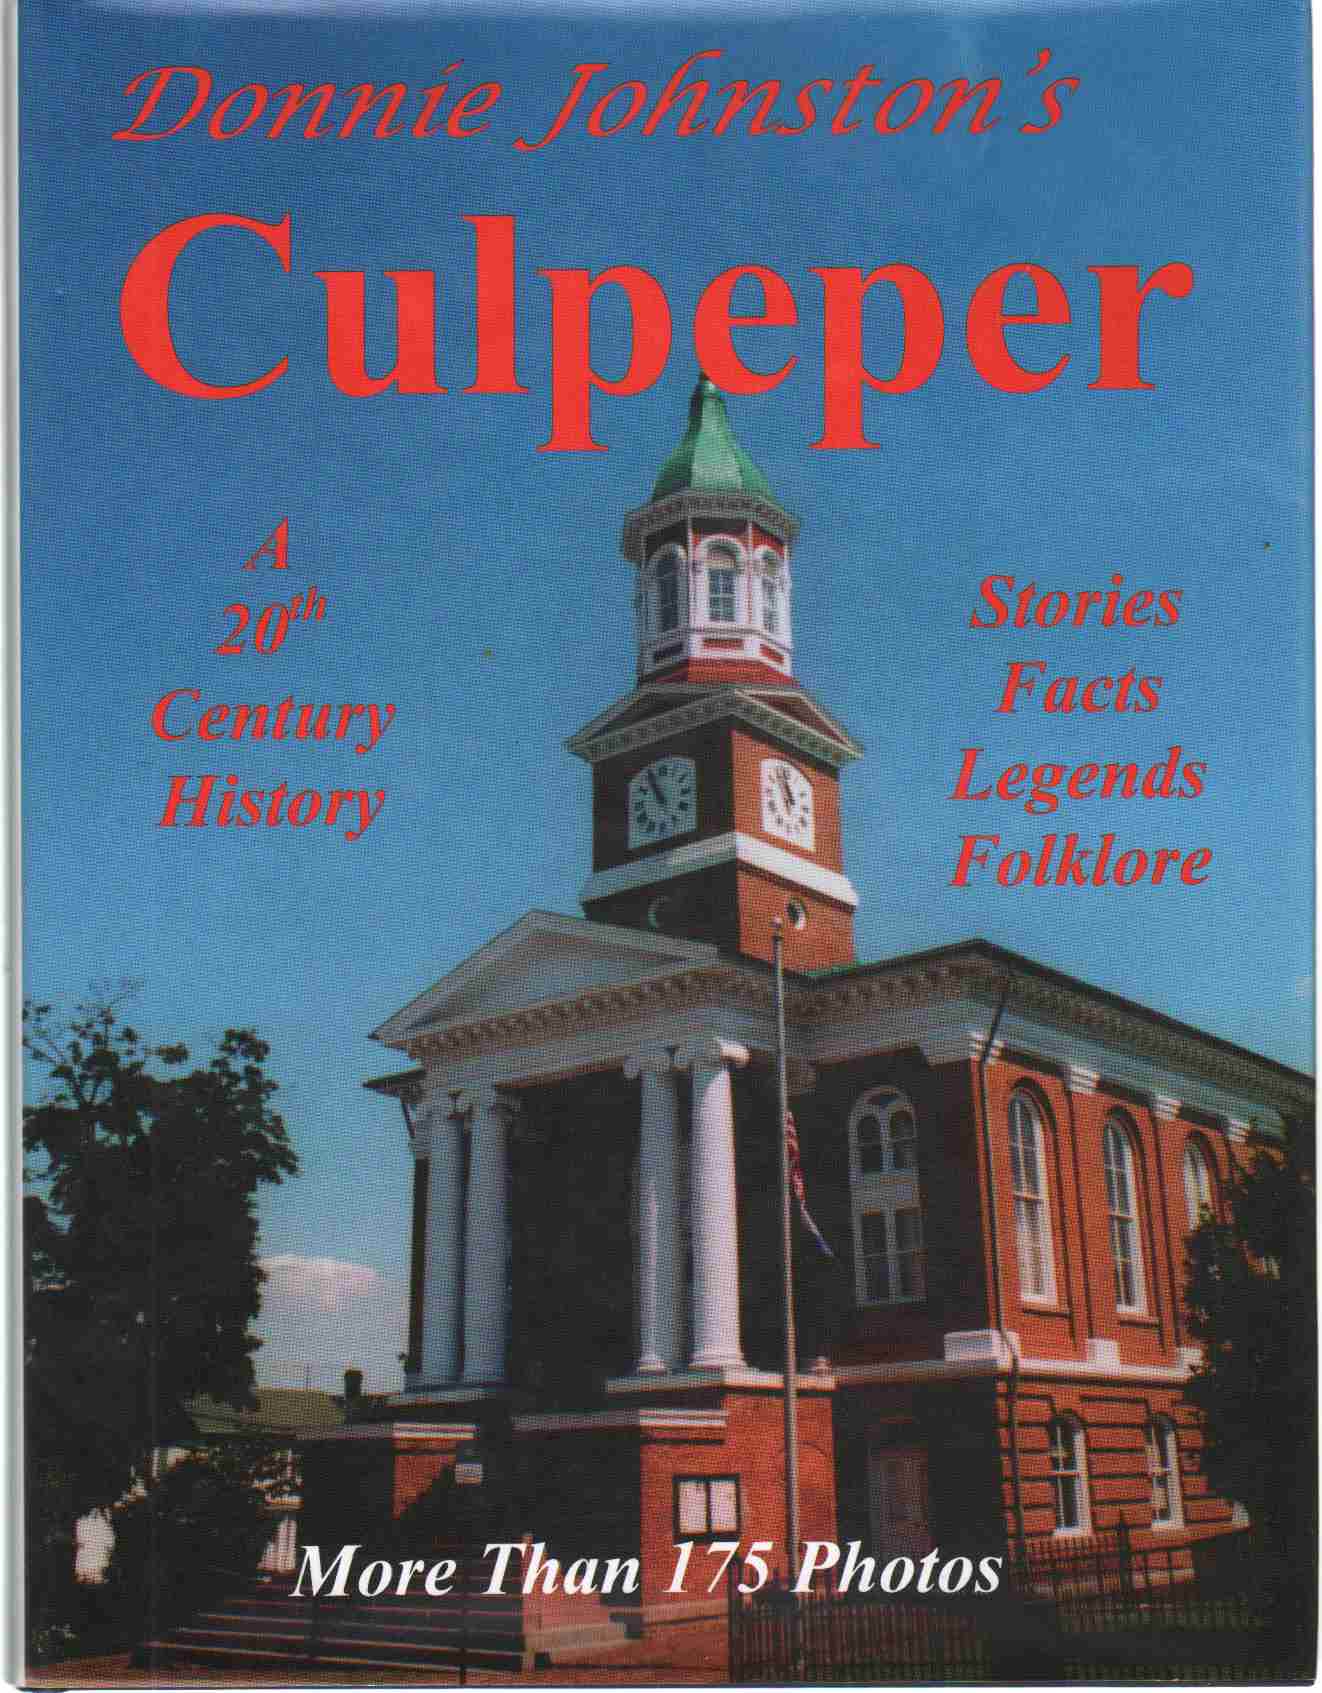 Johnston, Donnie - CULPEPER A 20th Century History - Stories, Facts, Legends, Folklore